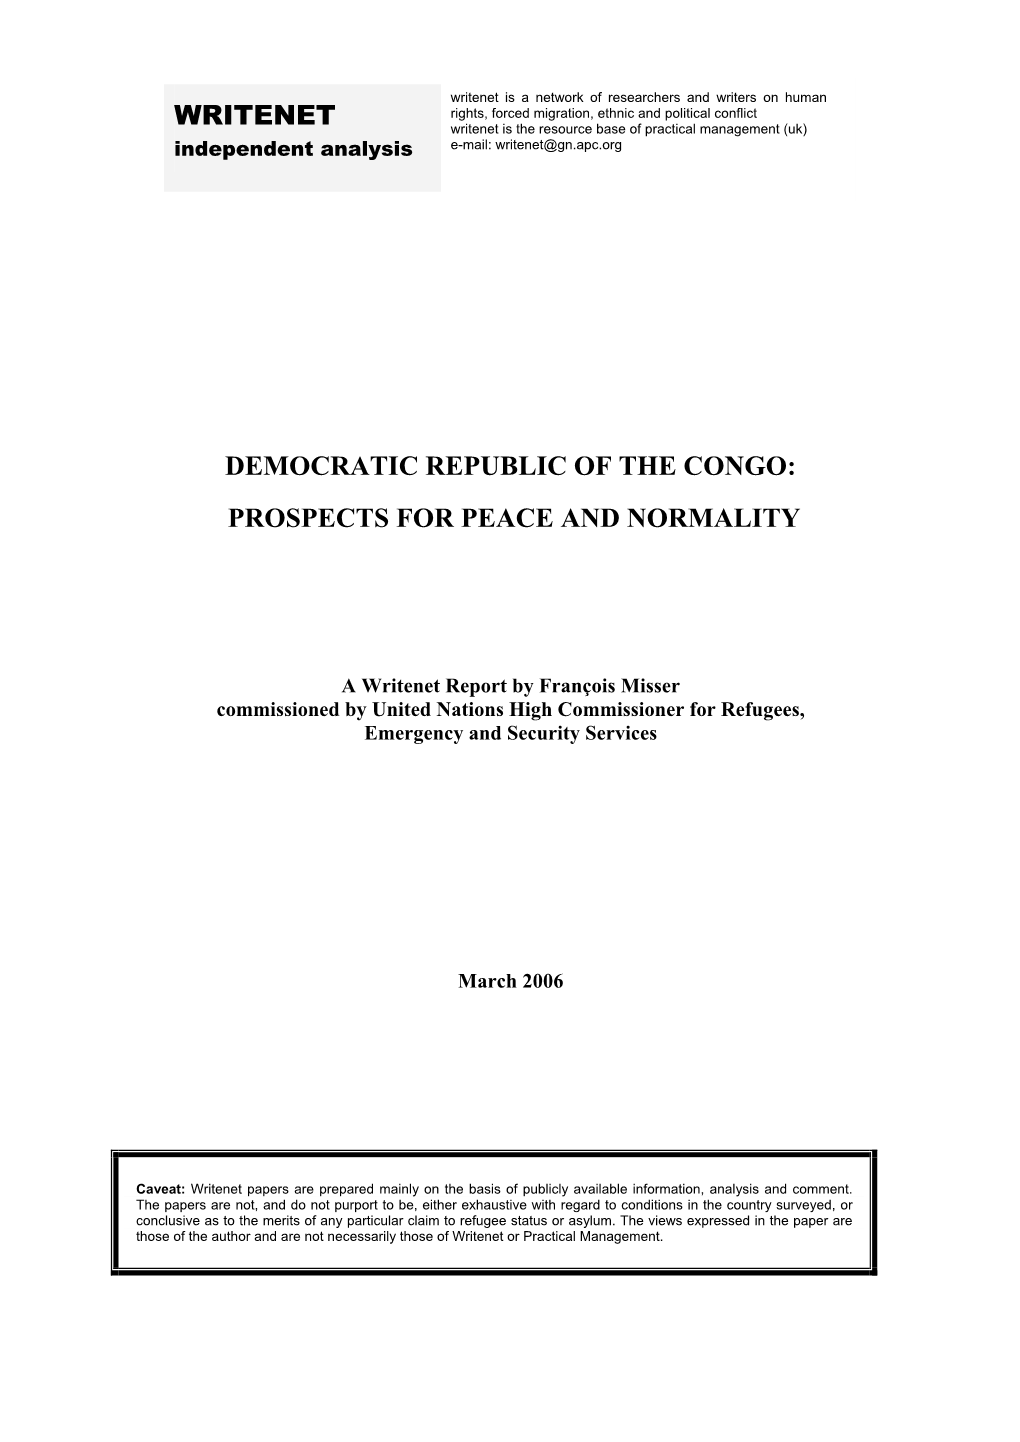 Democratic Republic of the Congo: Prospects of Peace and Normality